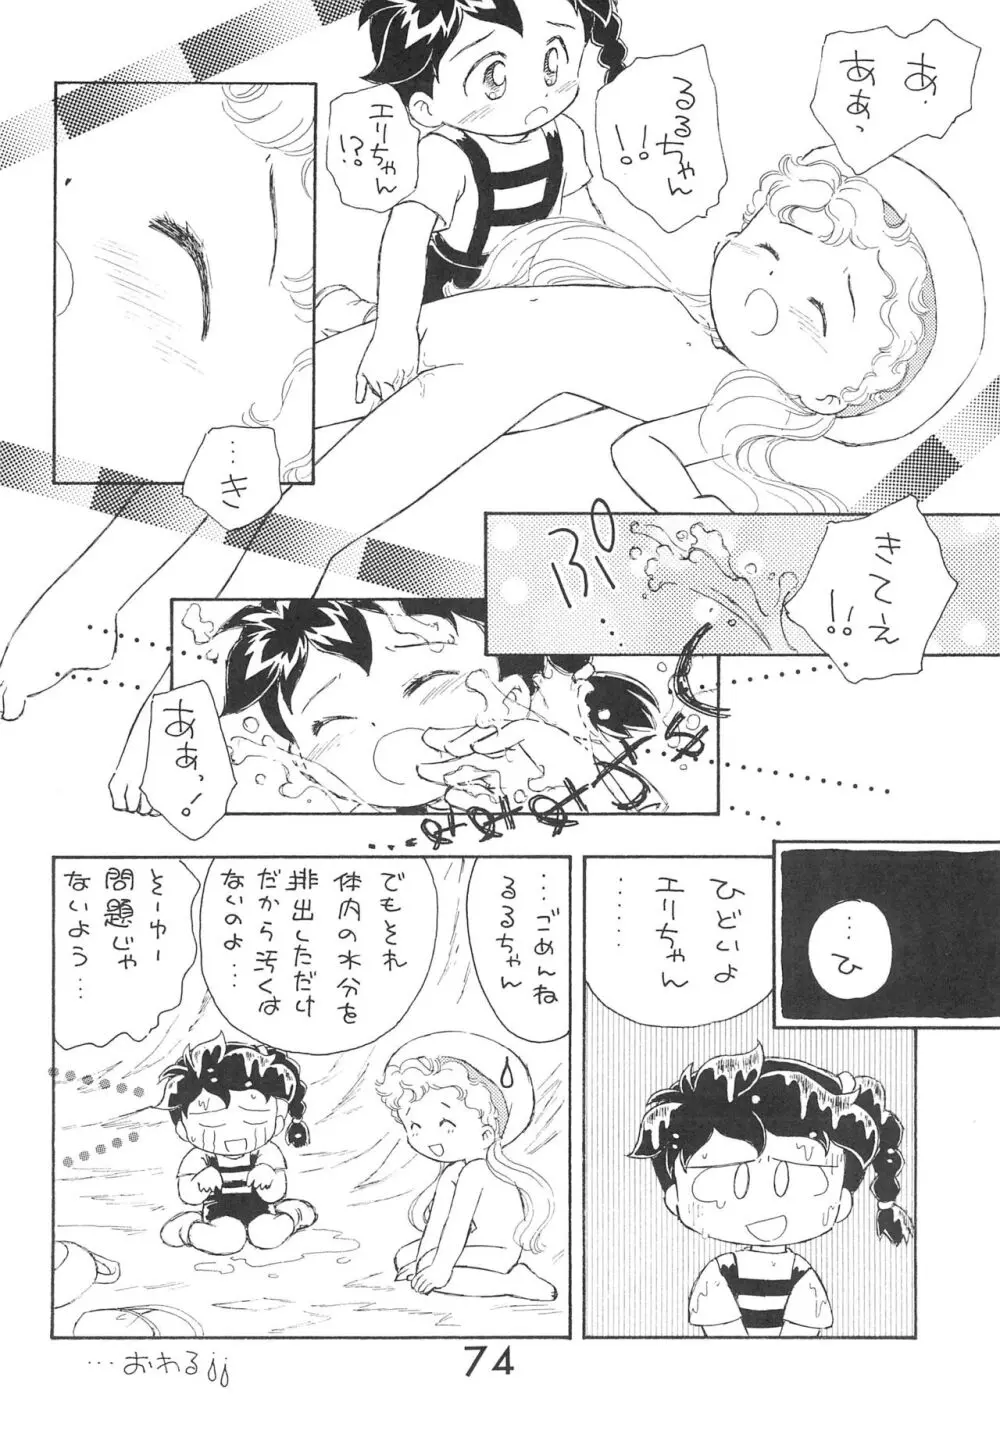 Fun House 9th Chame! - page74